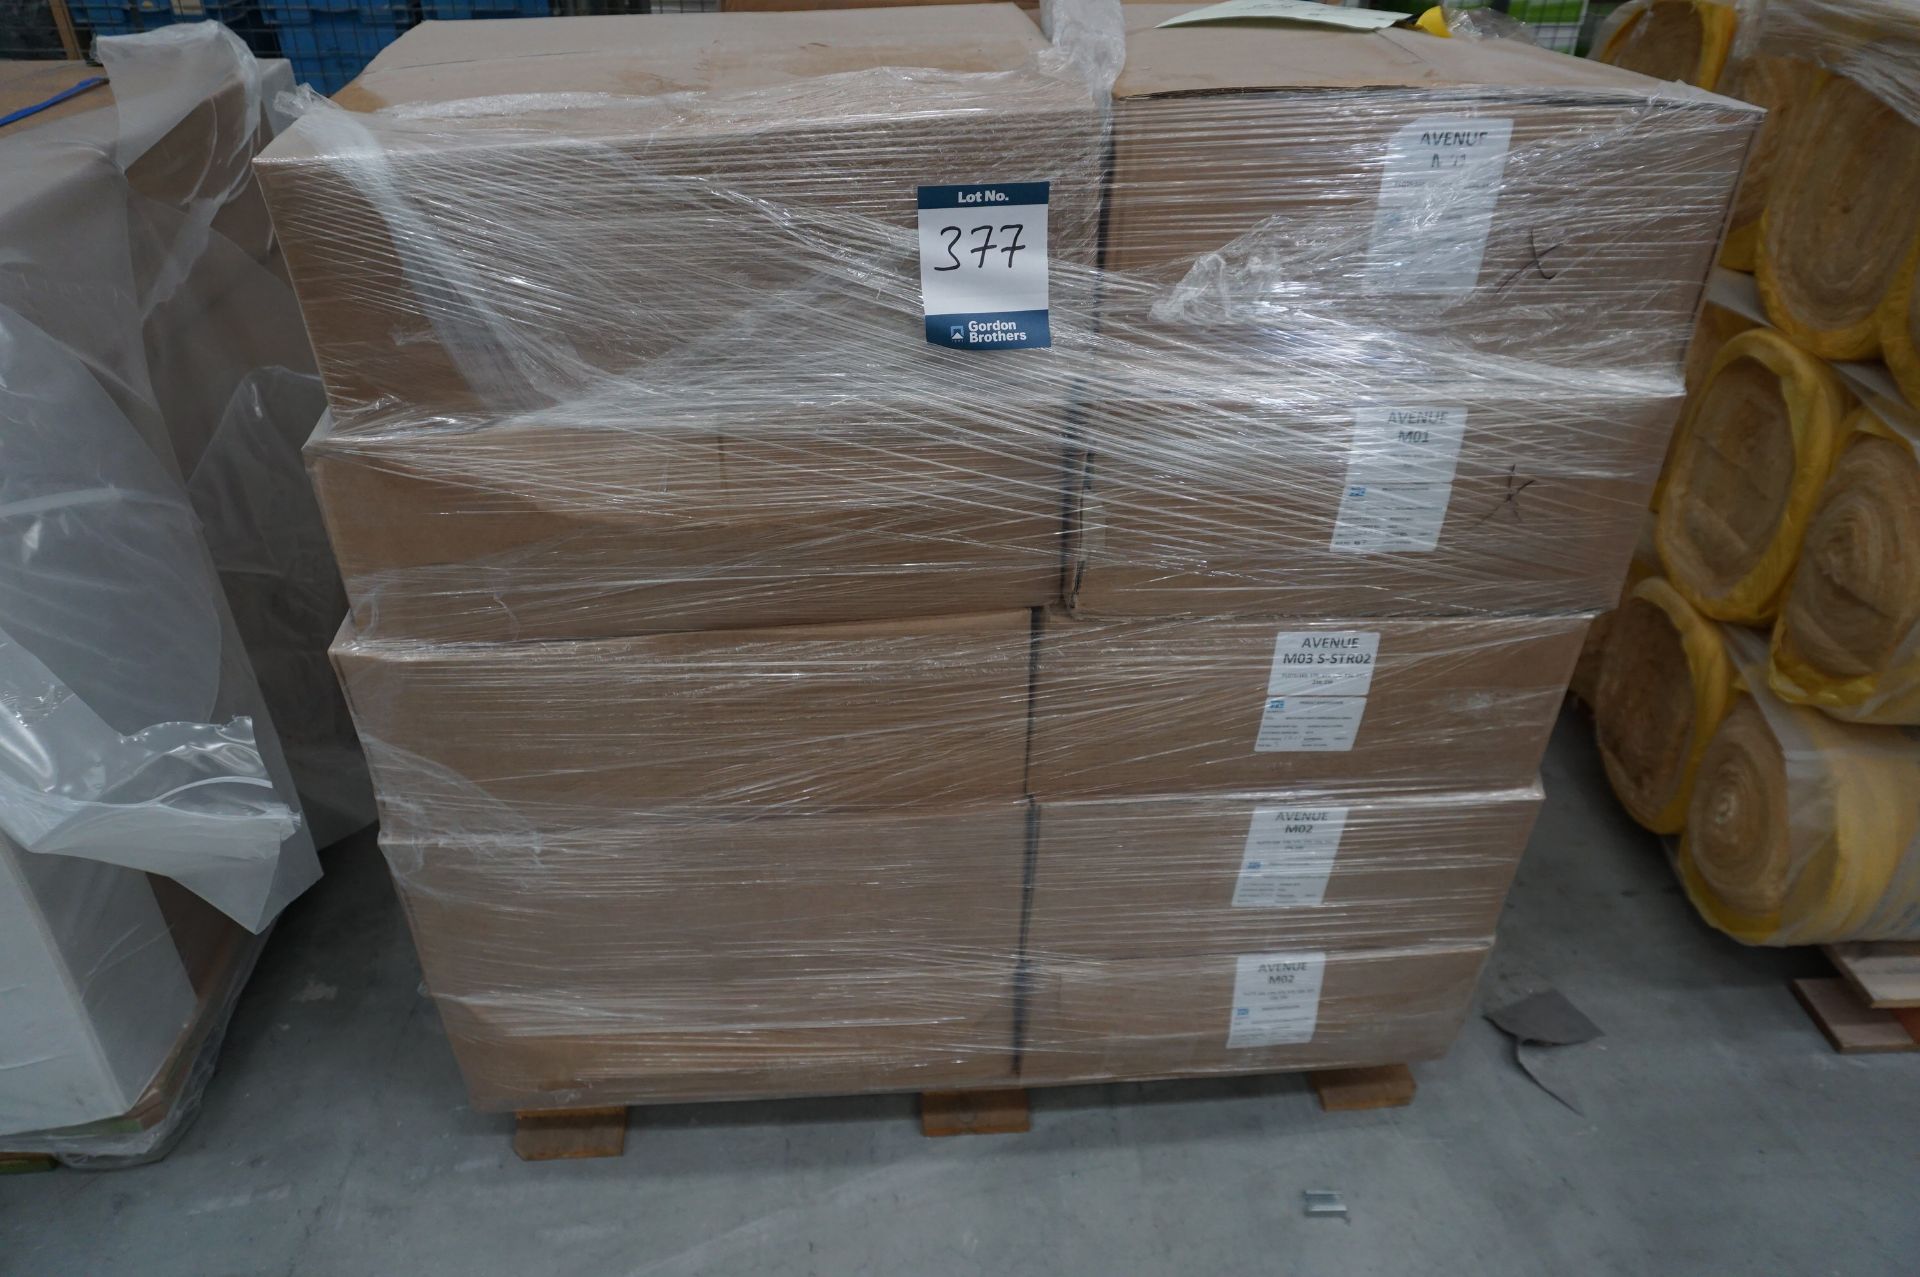 18x (no.) PPC, multifold plastic sheet bags used for module covers, size 15800mm x 2000mm x 200mu